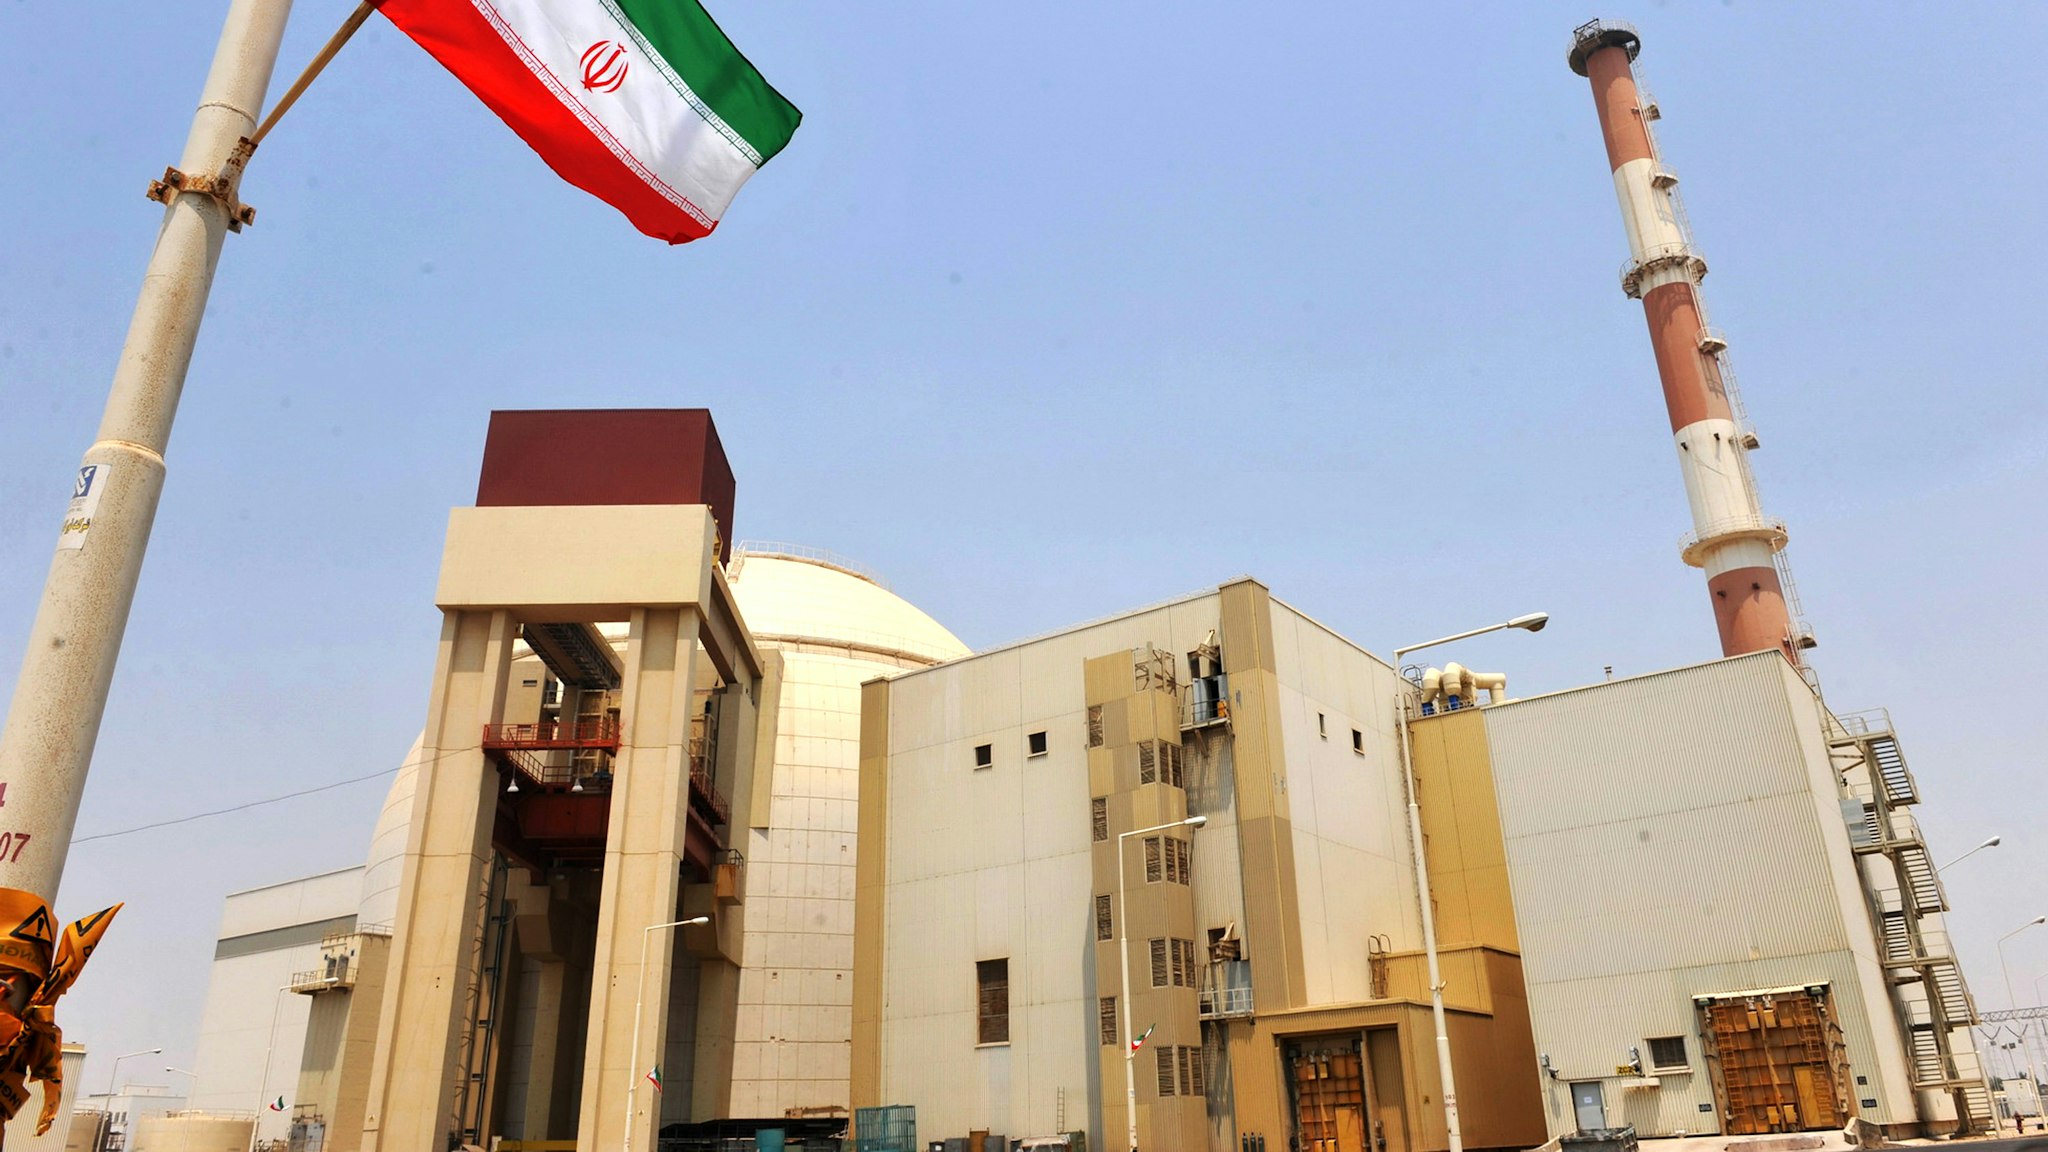 BUSHEHR, IRAN - AUGUST 21: This handout image supplied by the IIPA (Iran International Photo Agency) shows a view of the reactor building at the Russian-built Bushehr nuclear power plant as the first fuel is loaded, on August 21, 2010 in Bushehr, southern Iran. The Russiian built and operated nuclear power station has taken 35 years to build due to a series of sanctions imposed by the United Nations. The move has satisfied International concerns that Iran were intending to produce a nuclear weapon, but the facility's uranium fuel will fall well below the enrichment level needed for weapons-grade uranium. The plant is likely to begin electrictity production in a month.